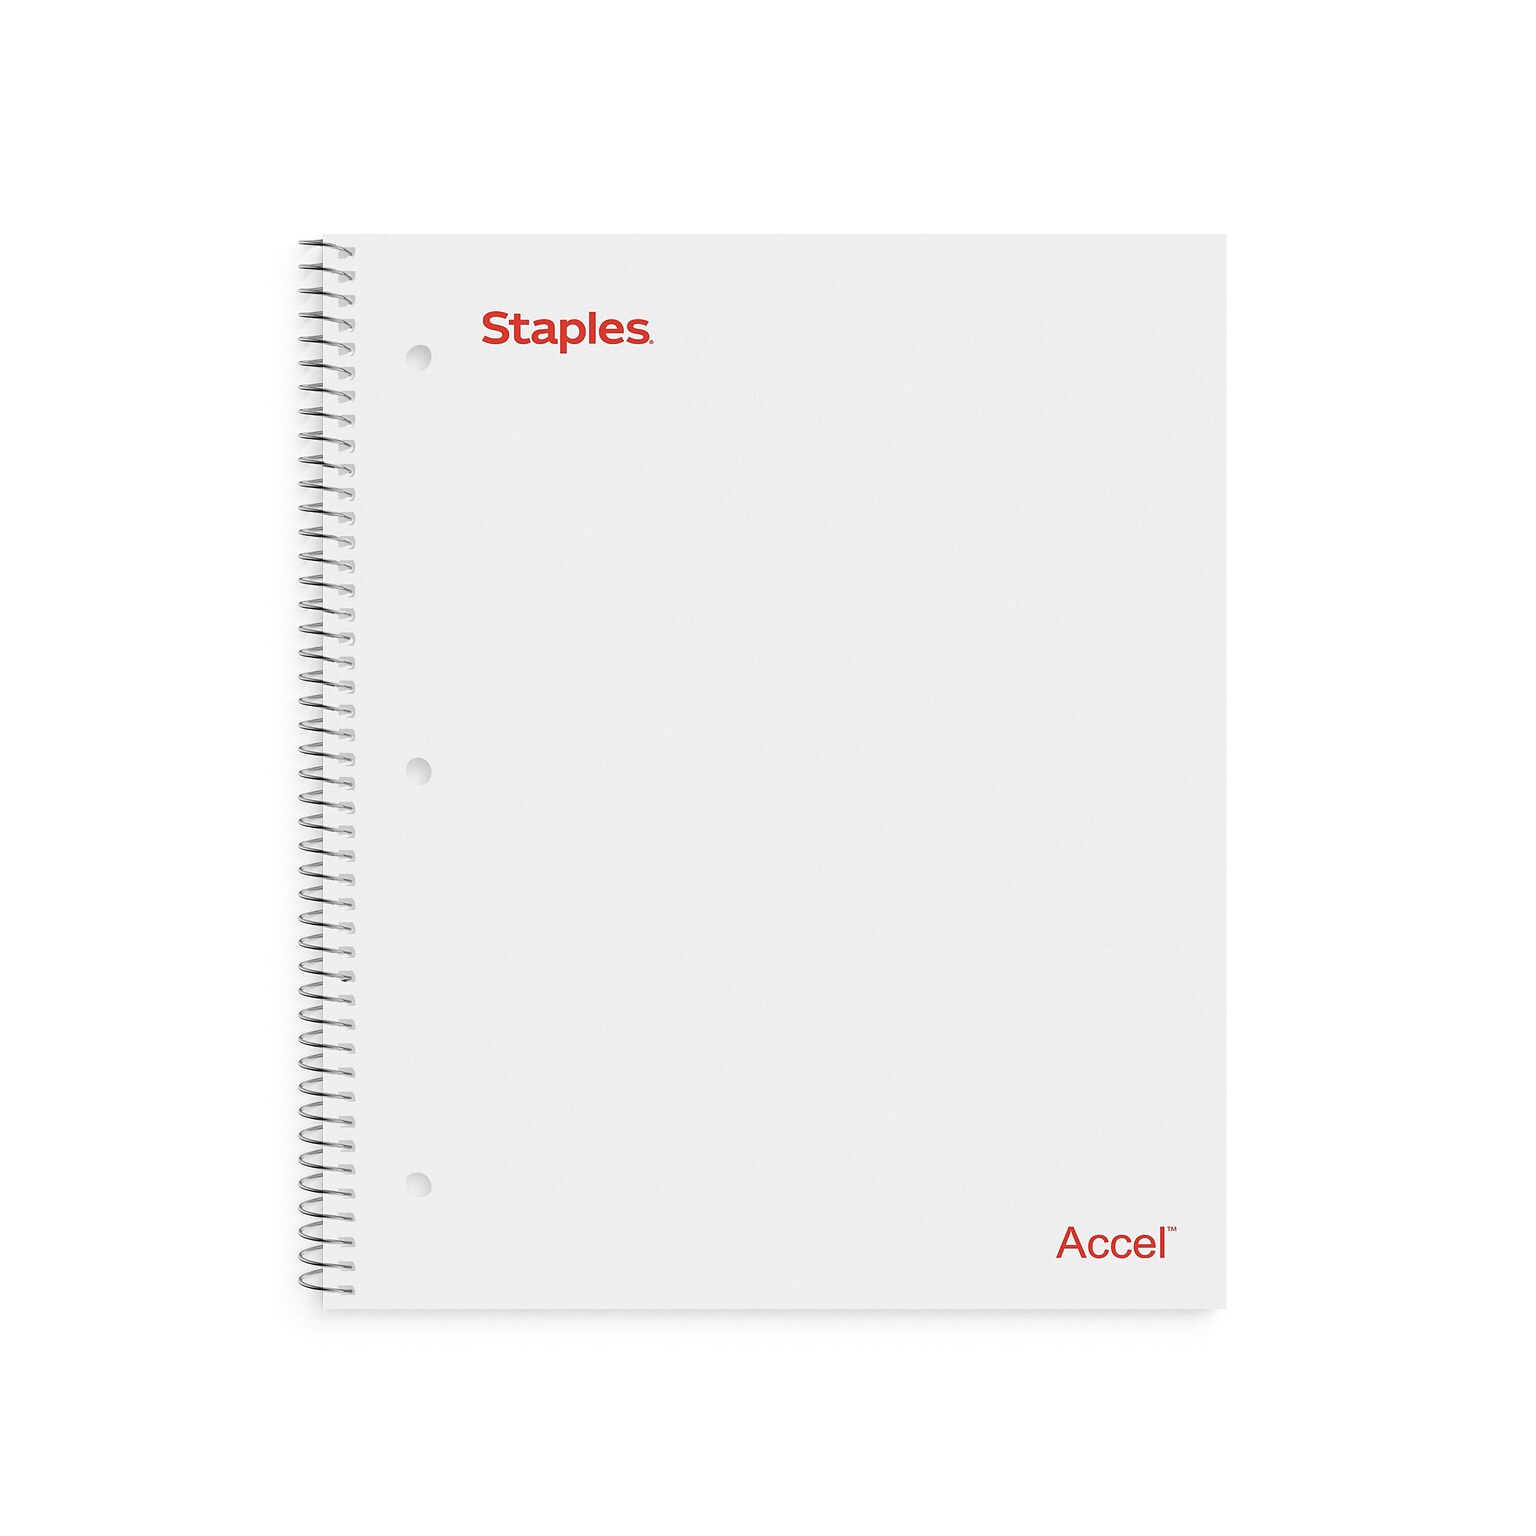 Staples Premium 1-Subject Notebook, 8 x 10.5, Wide Ruled, 100 Sheets, White (TR25543)